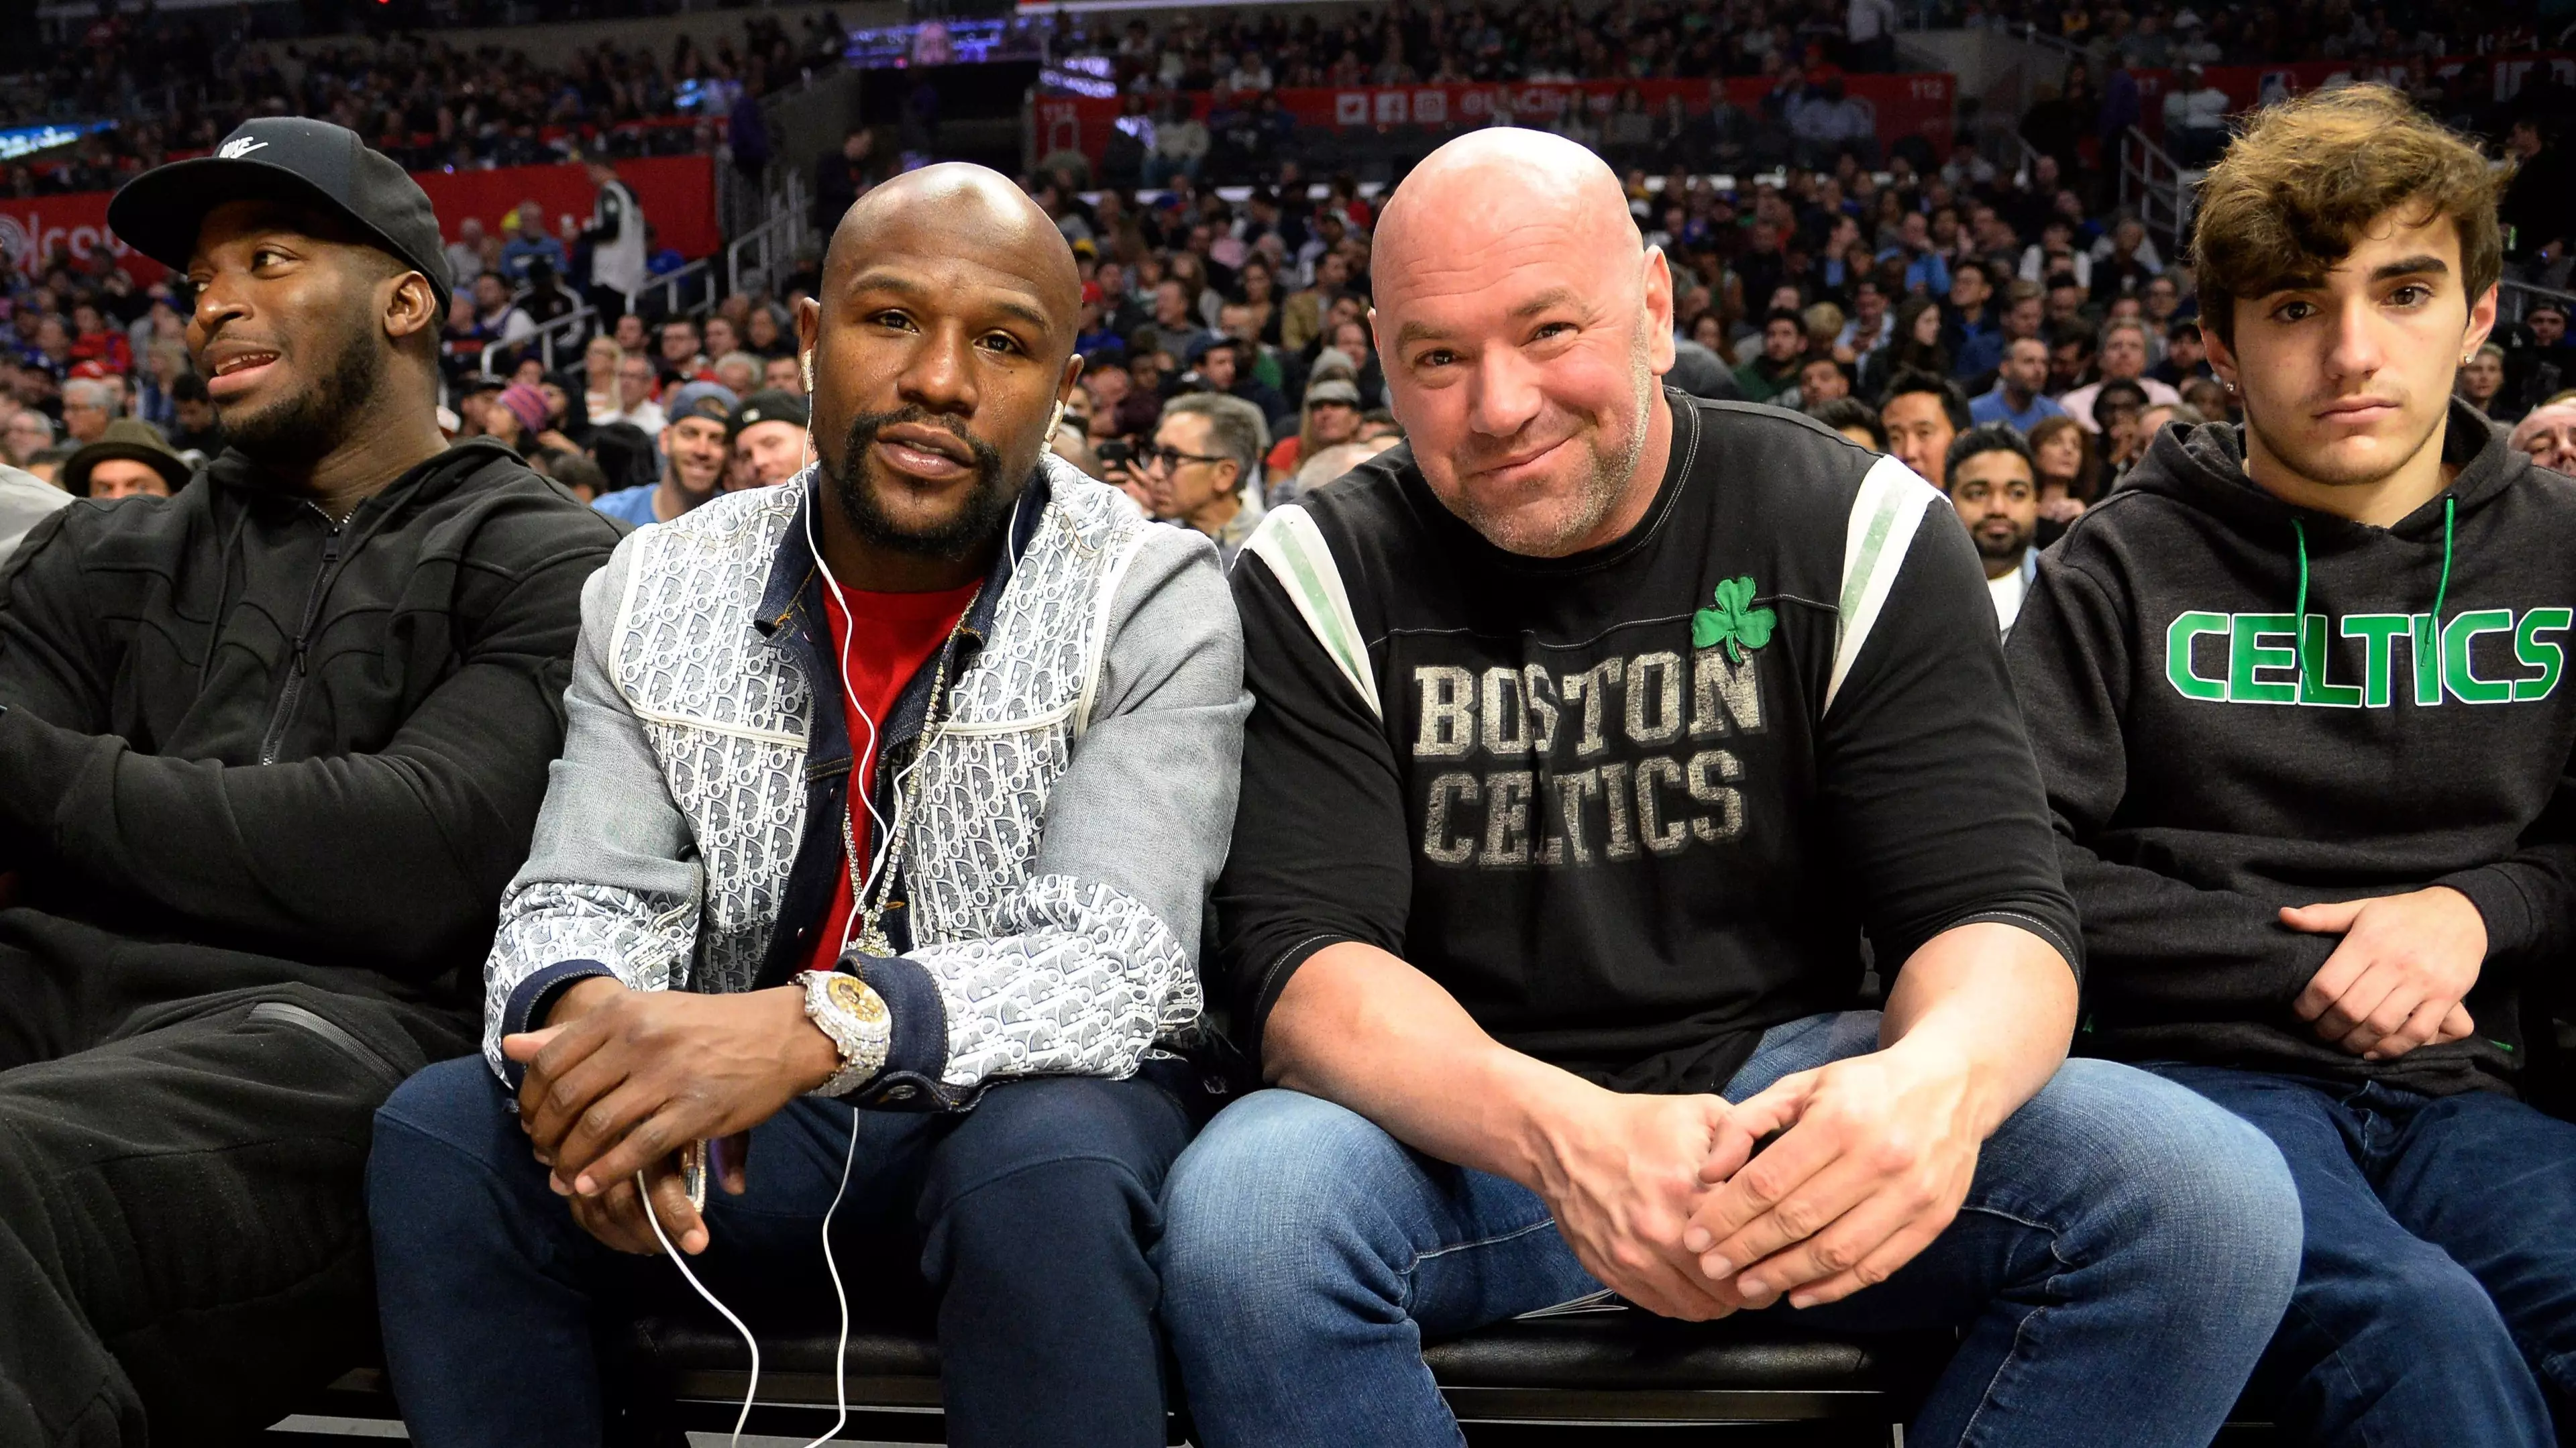 Dana White Gives Update On Floyd Mayweather's 2020 Fight Plans